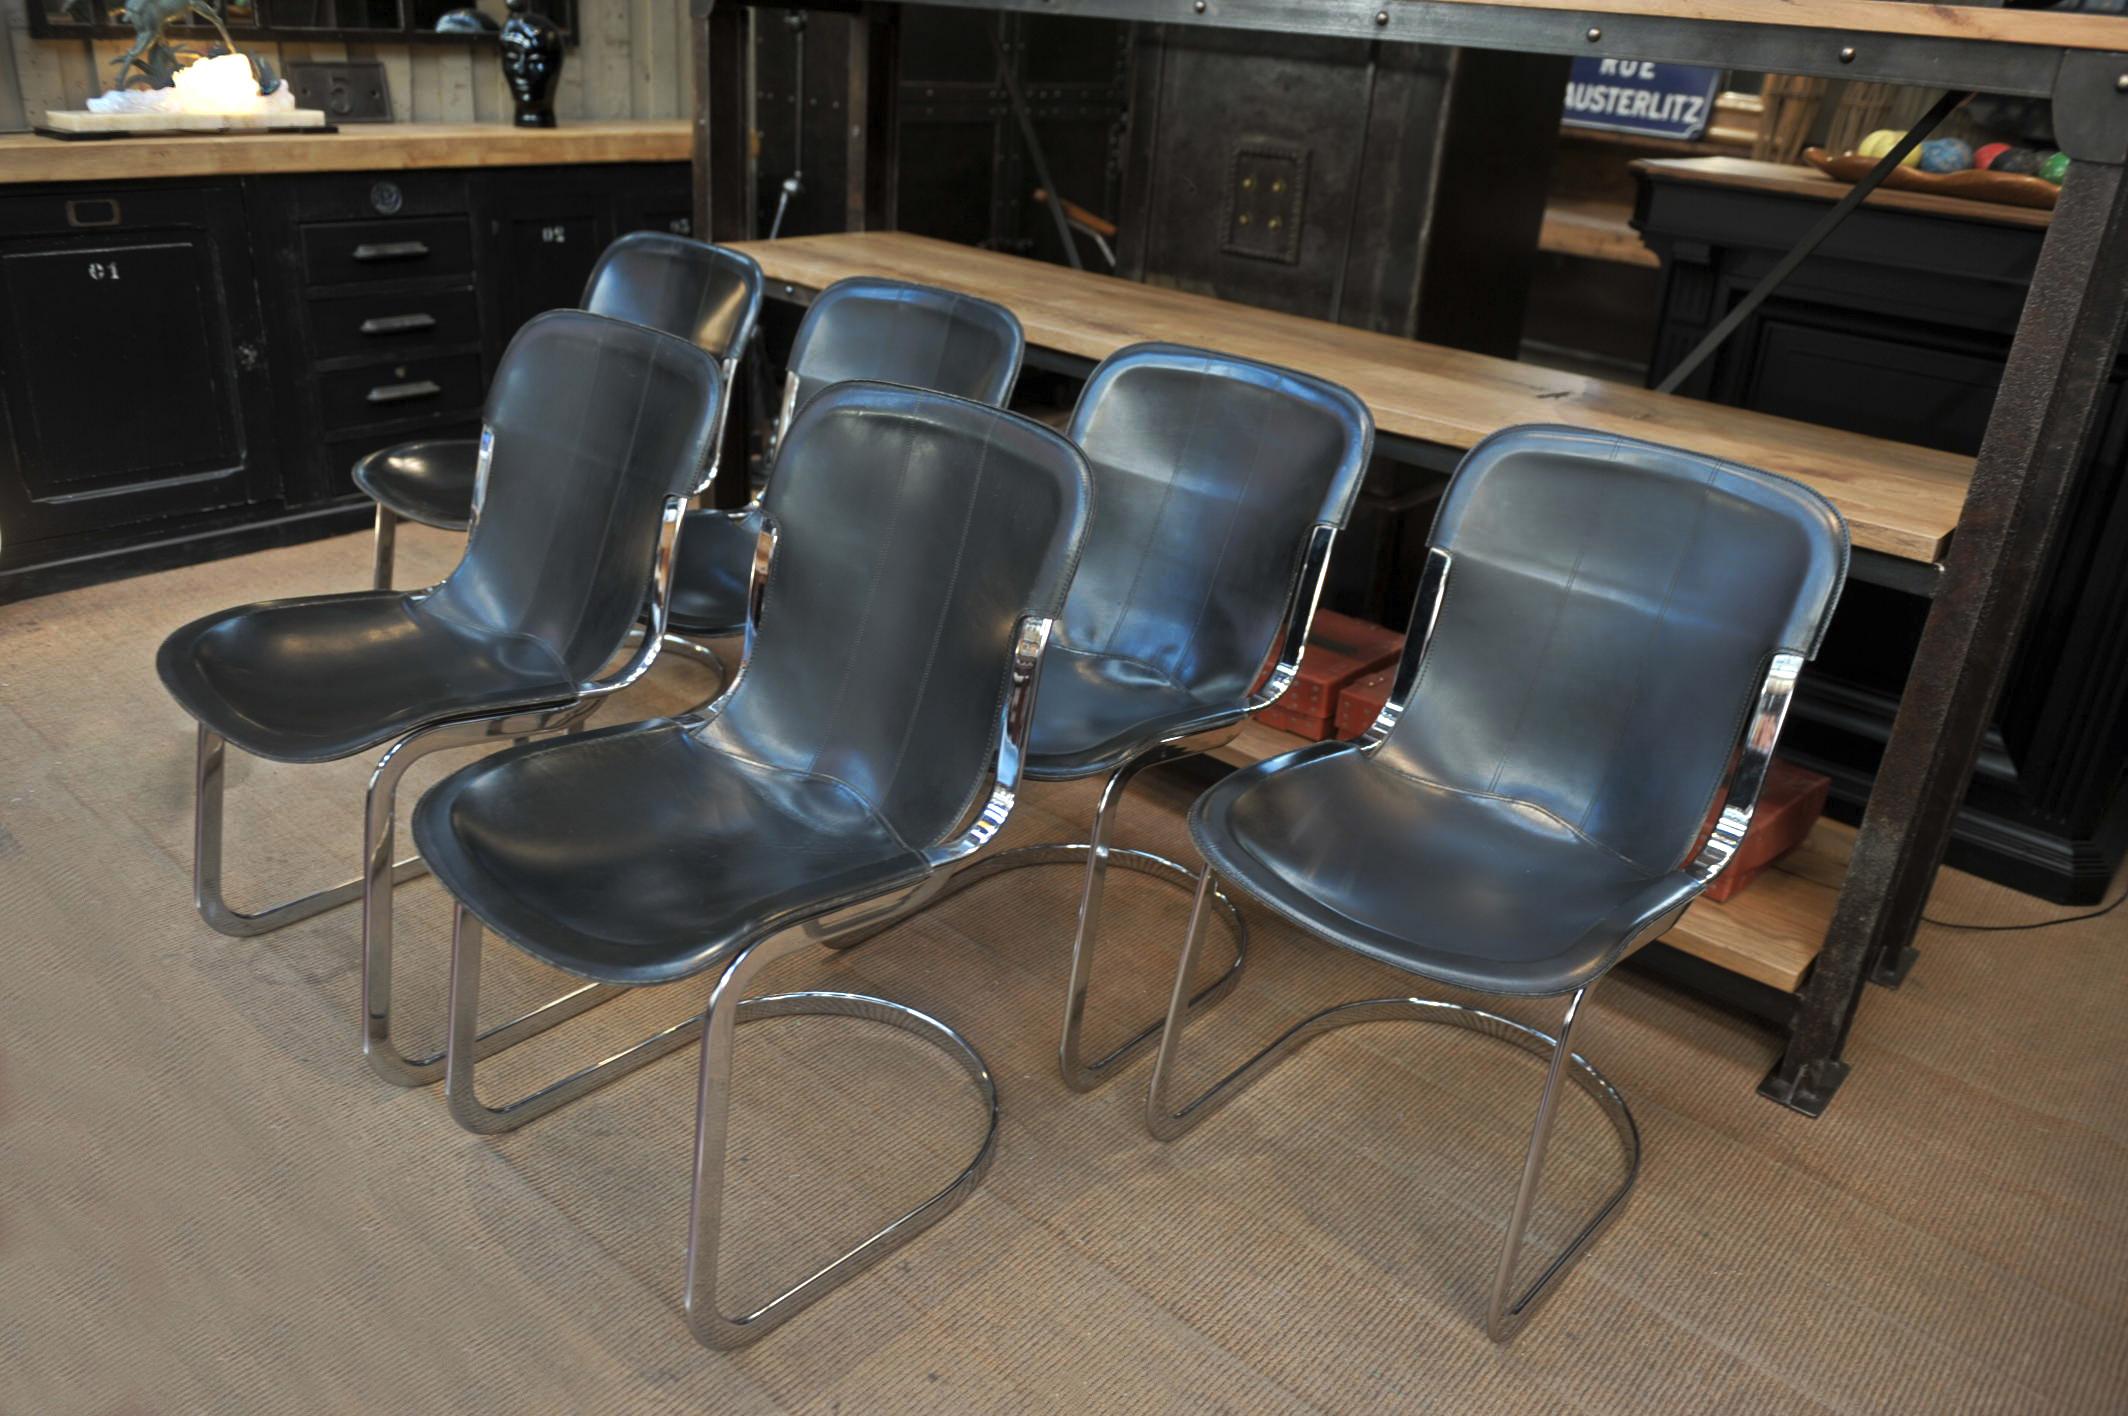 Italian Set of 6 Chairs by Designer Willy Rizzo Leather and Chrome Metal, circa 1970